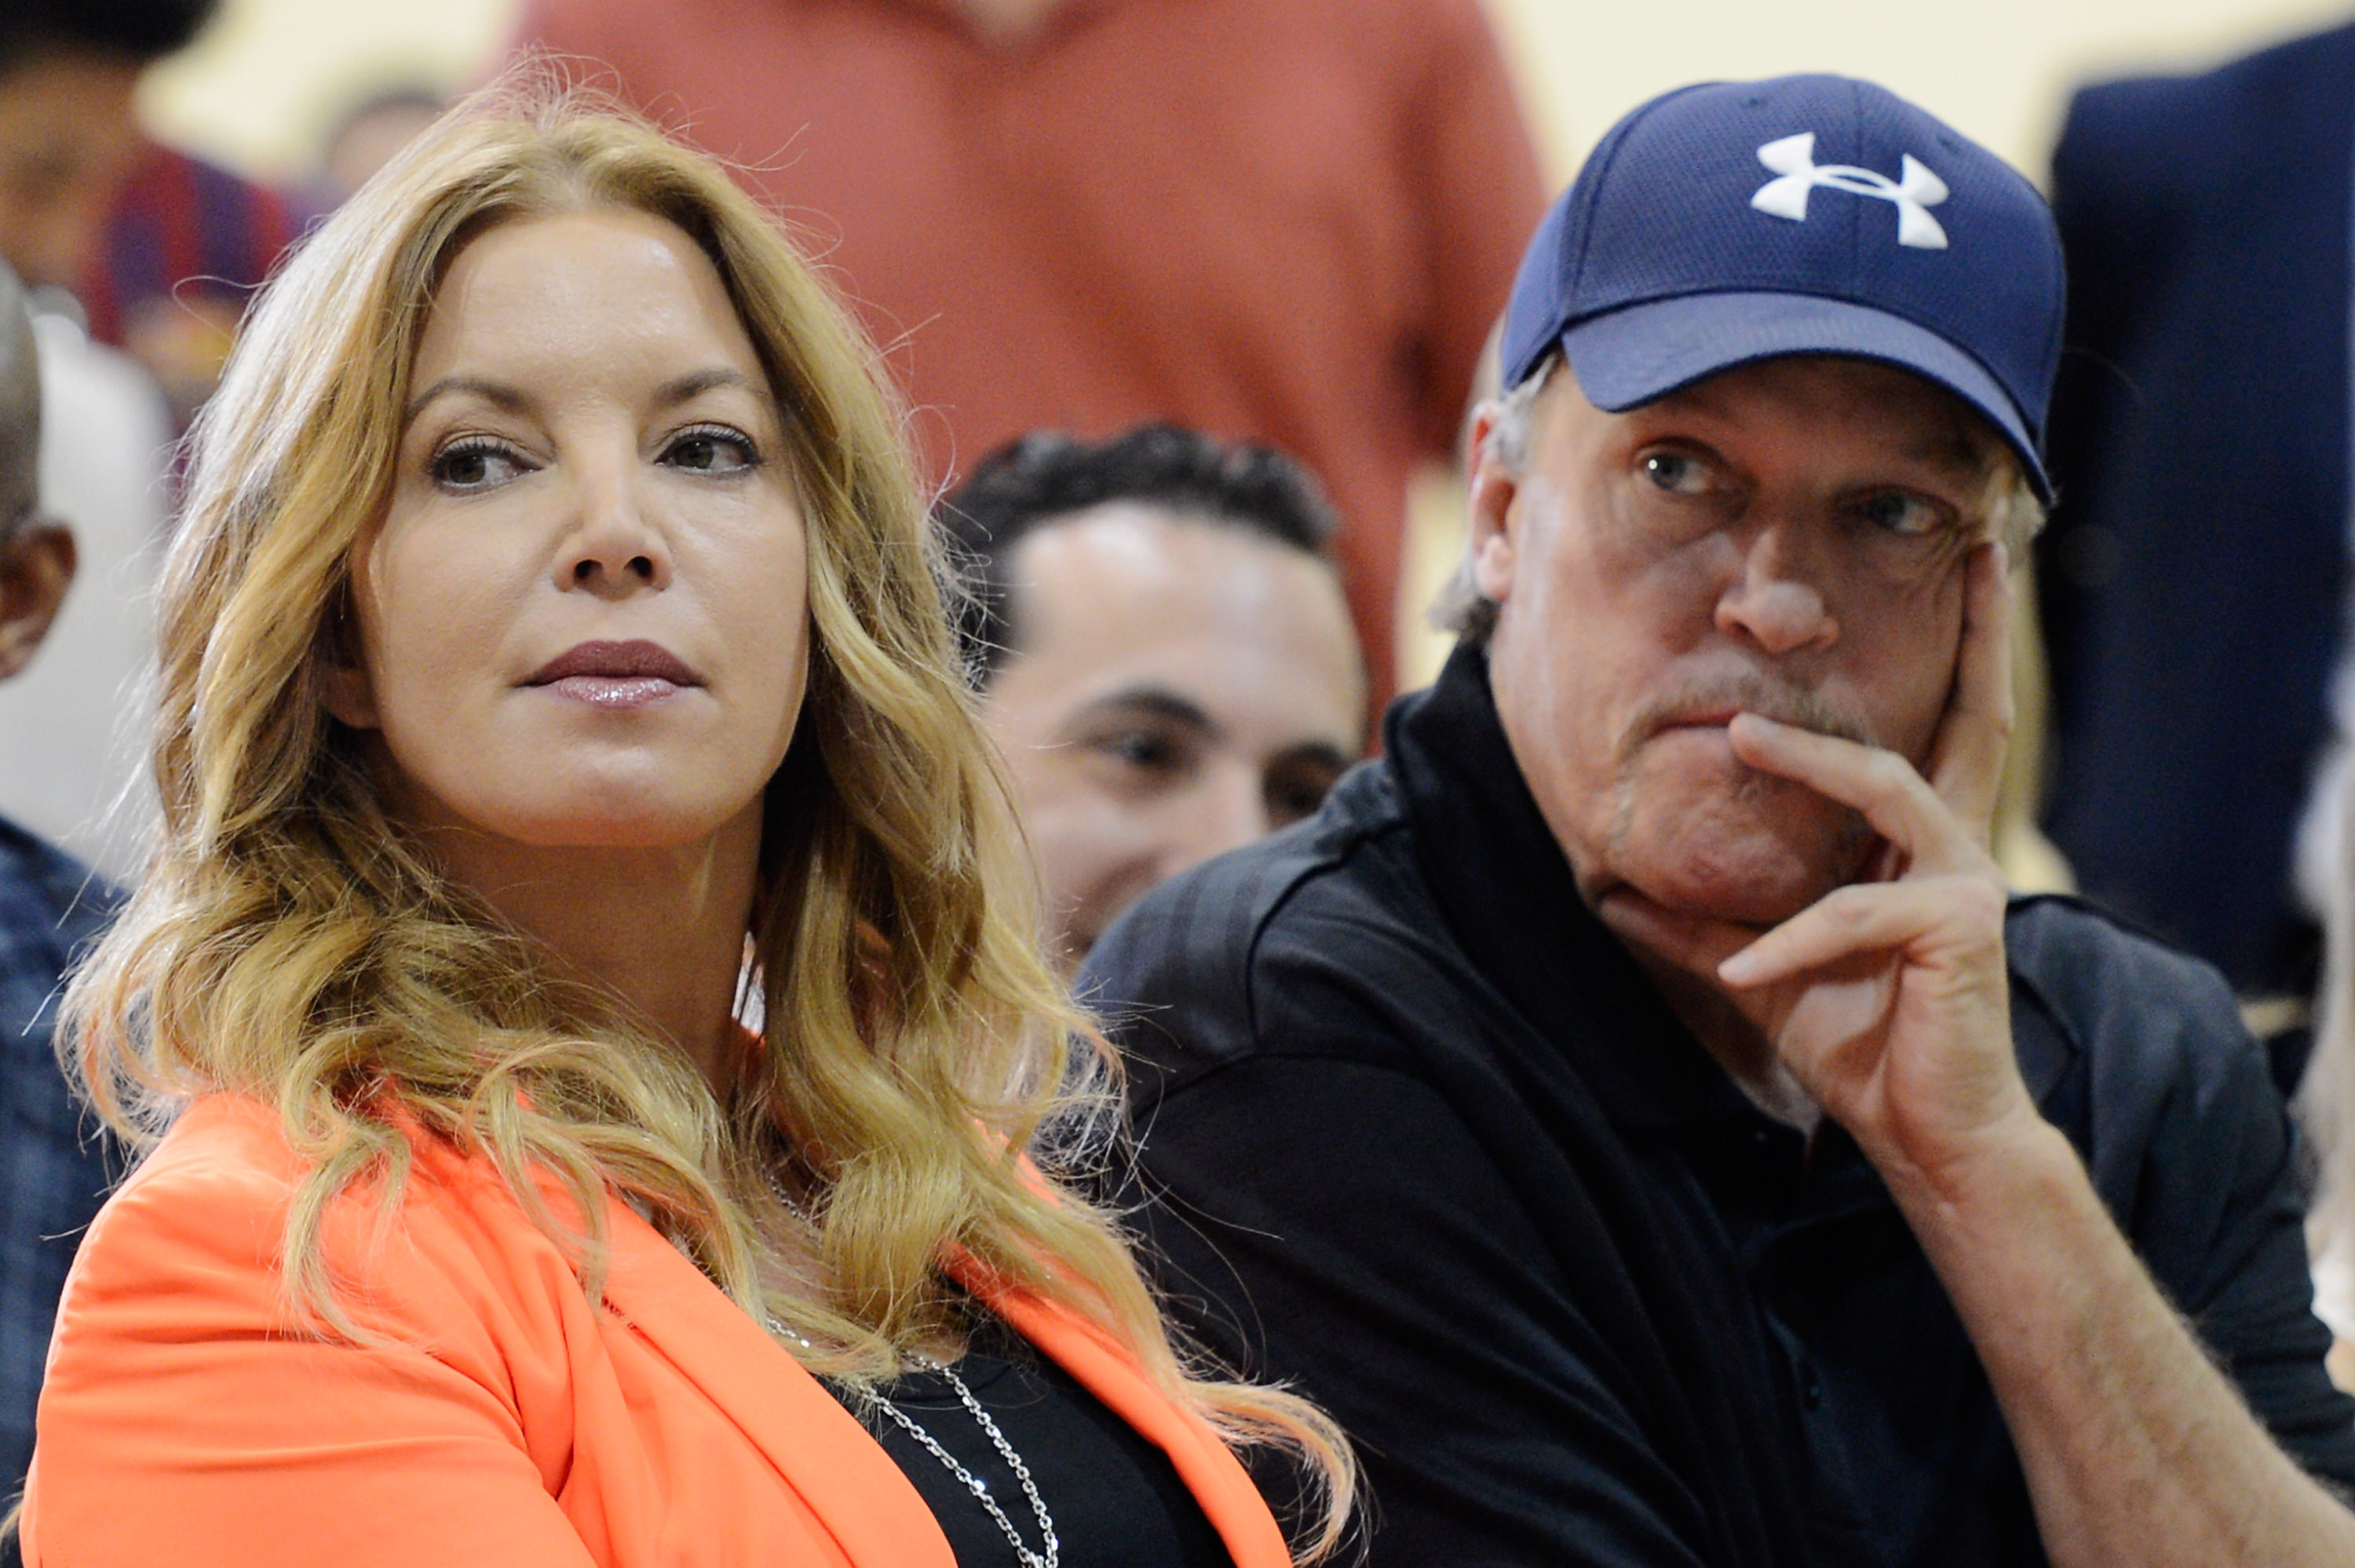 Jeanie Buss: Without Pau Gasol, that Lakers team wouldn't have